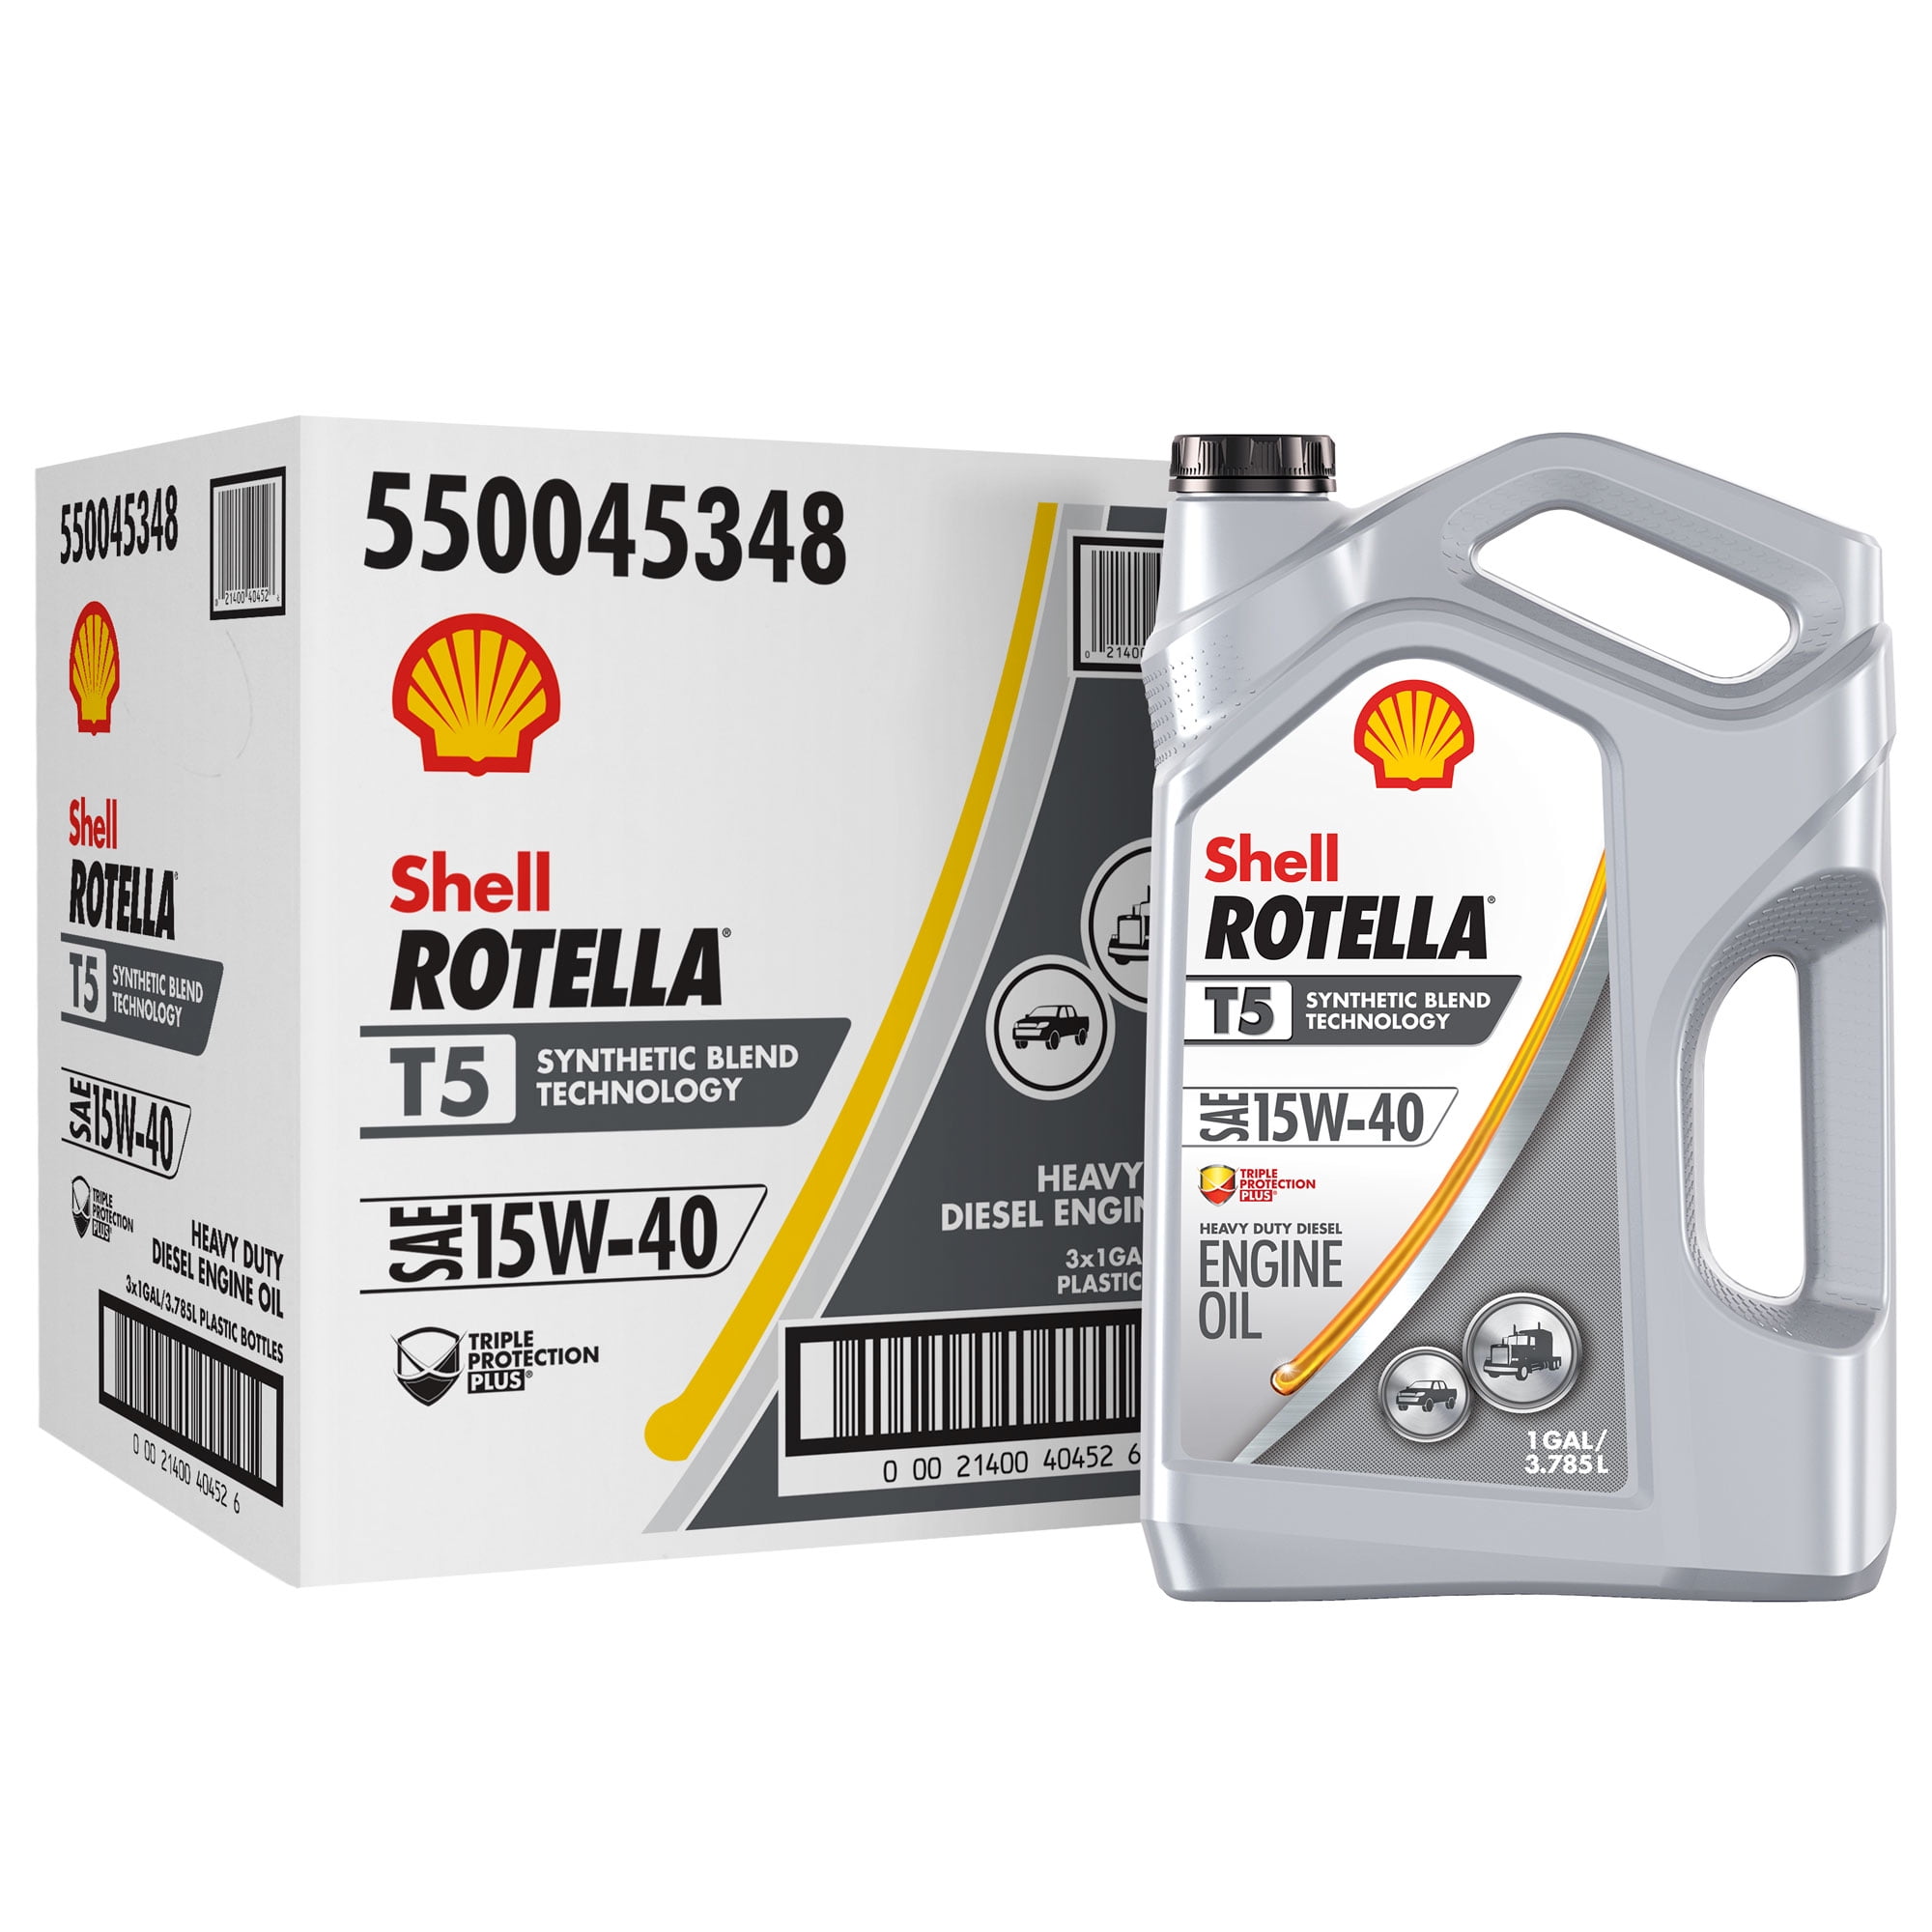 3-pack-shell-rotella-t5-15w-40-synthetic-blend-diesel-engine-oil-1